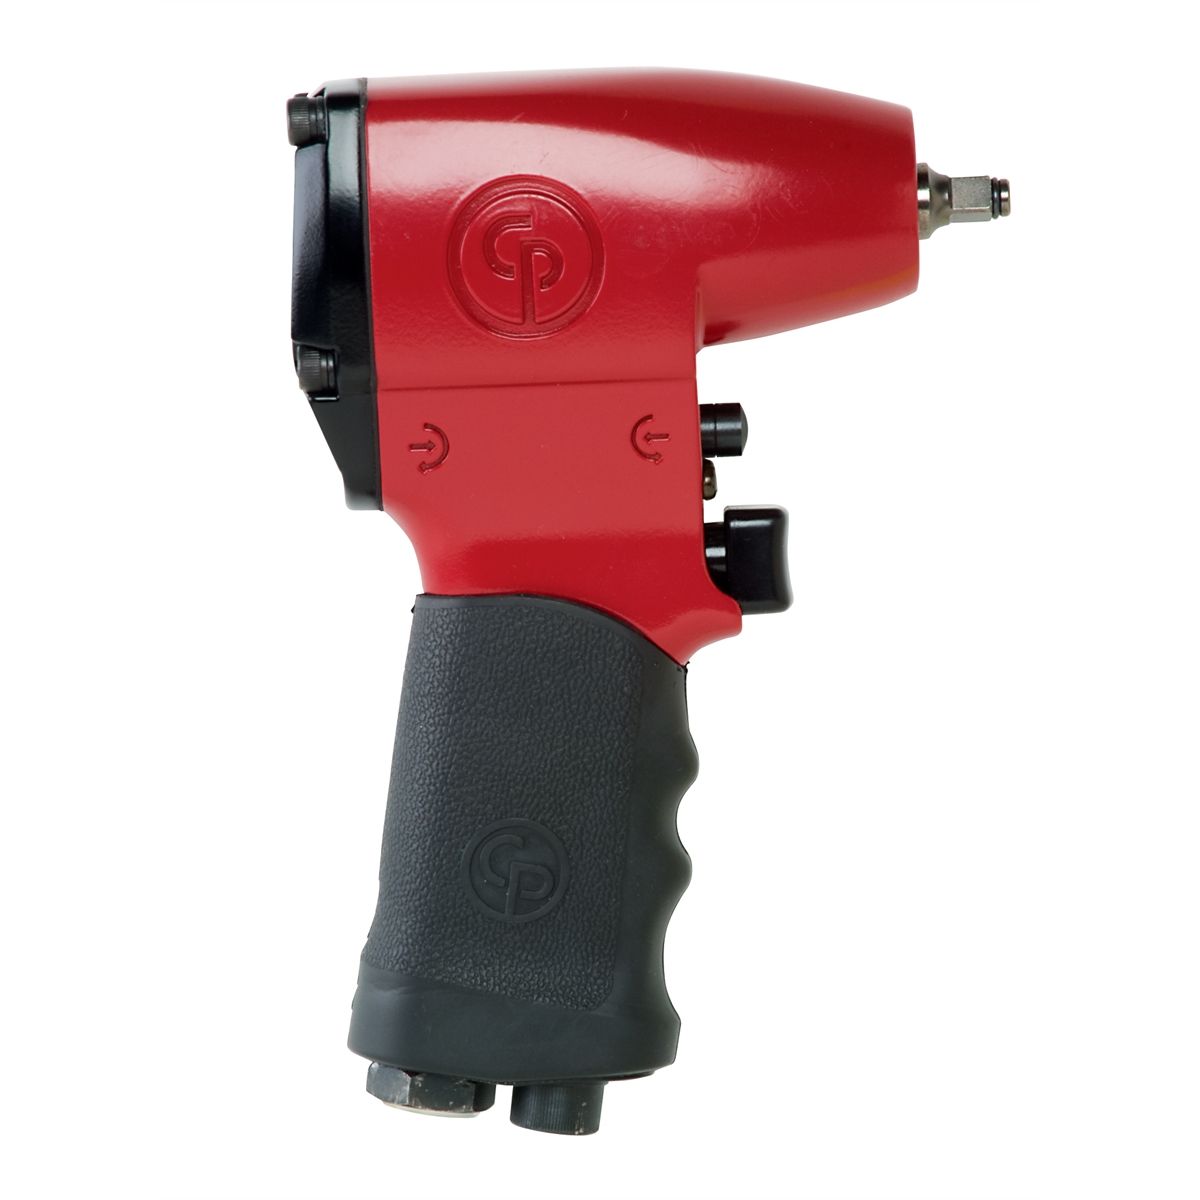 1/4" Inch Drive HD Air Impact Wrench CPT719 - 30 ft-lbs